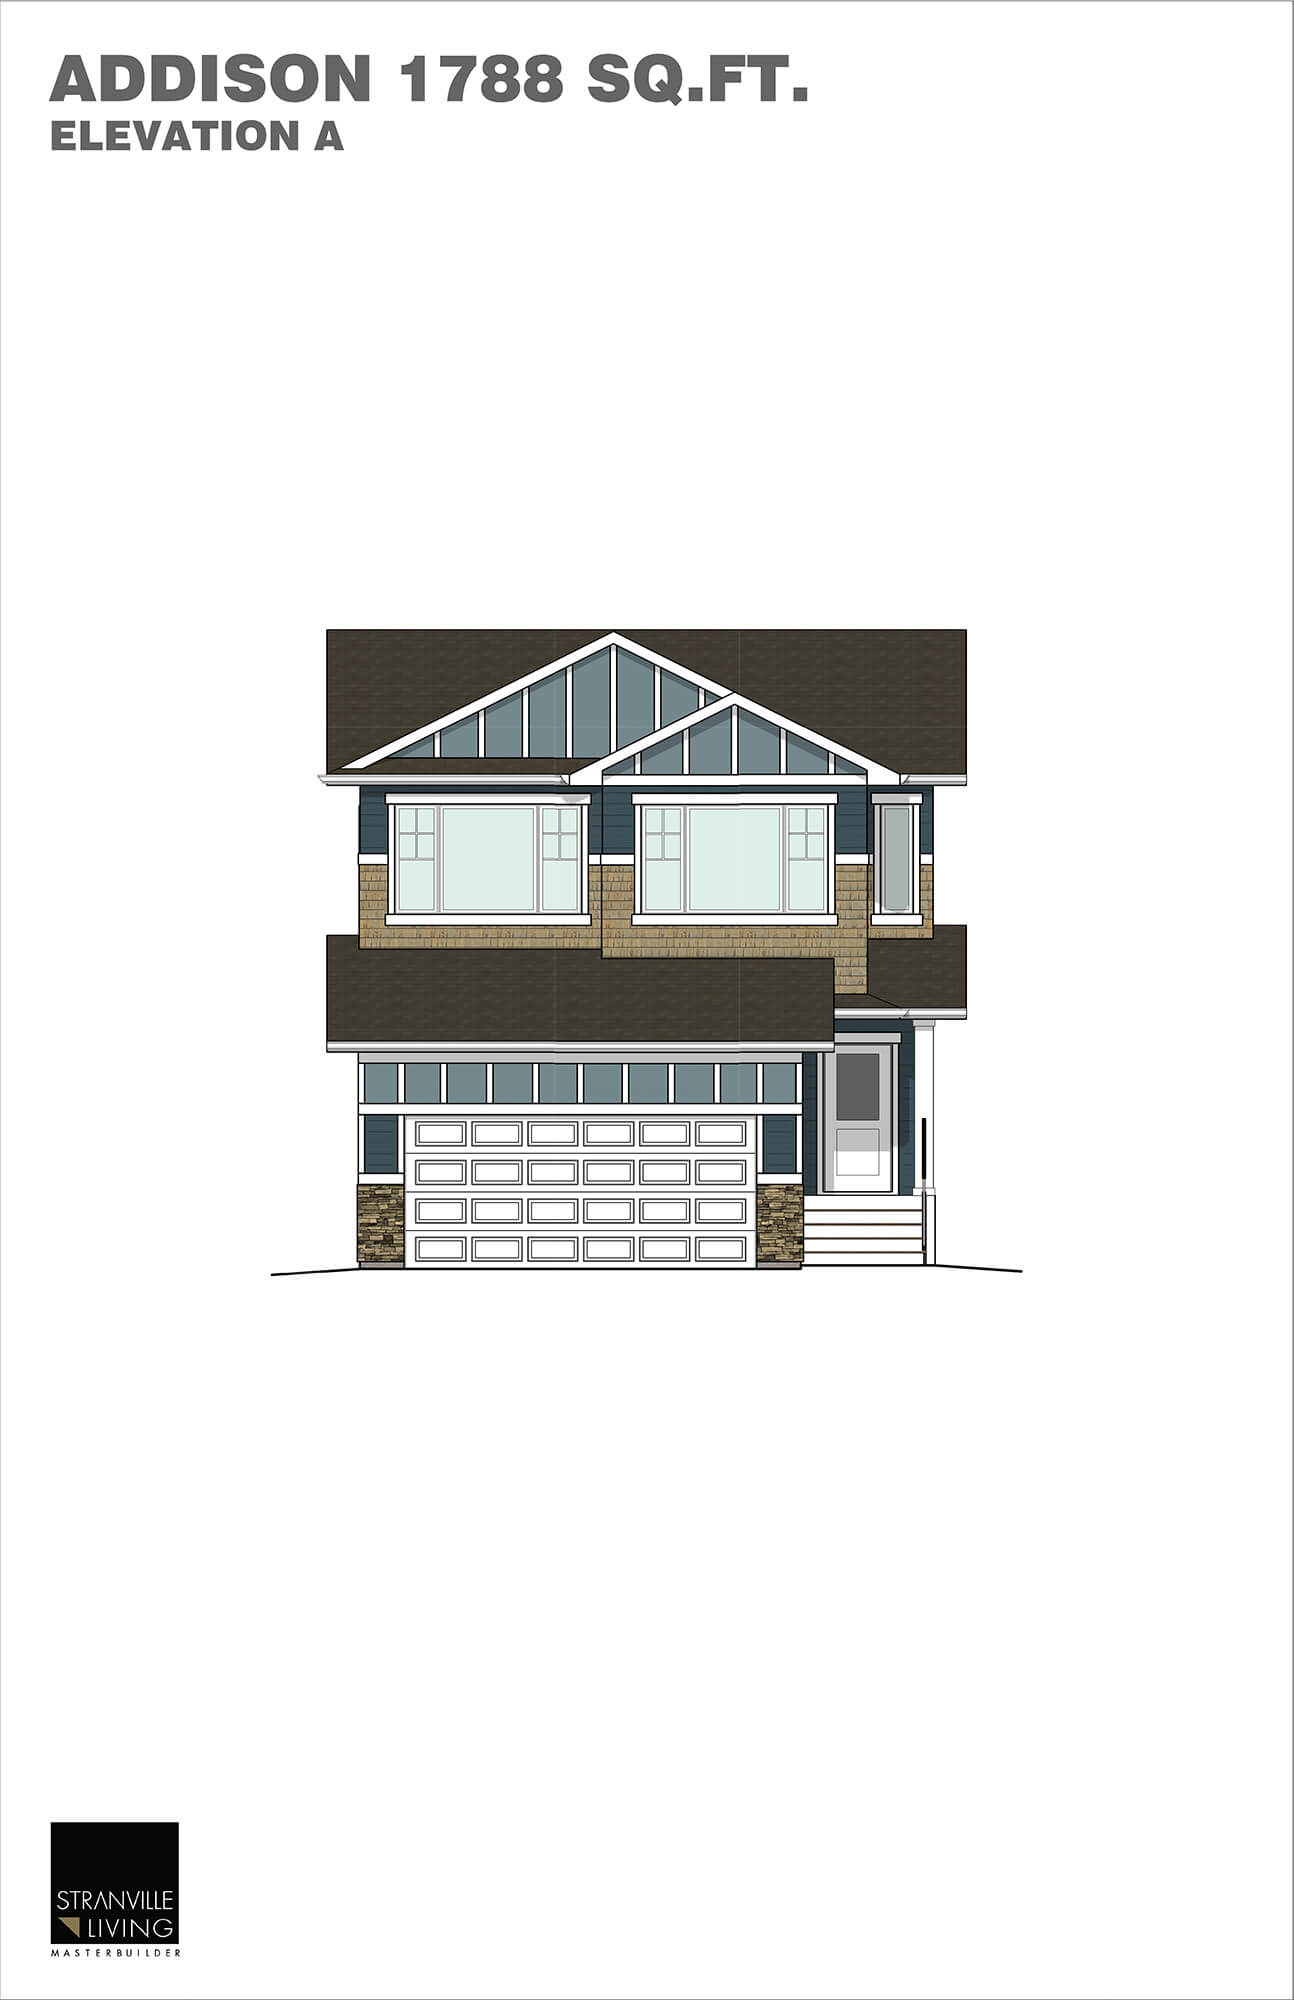 ADDISON - A - FRONT ELEVATION